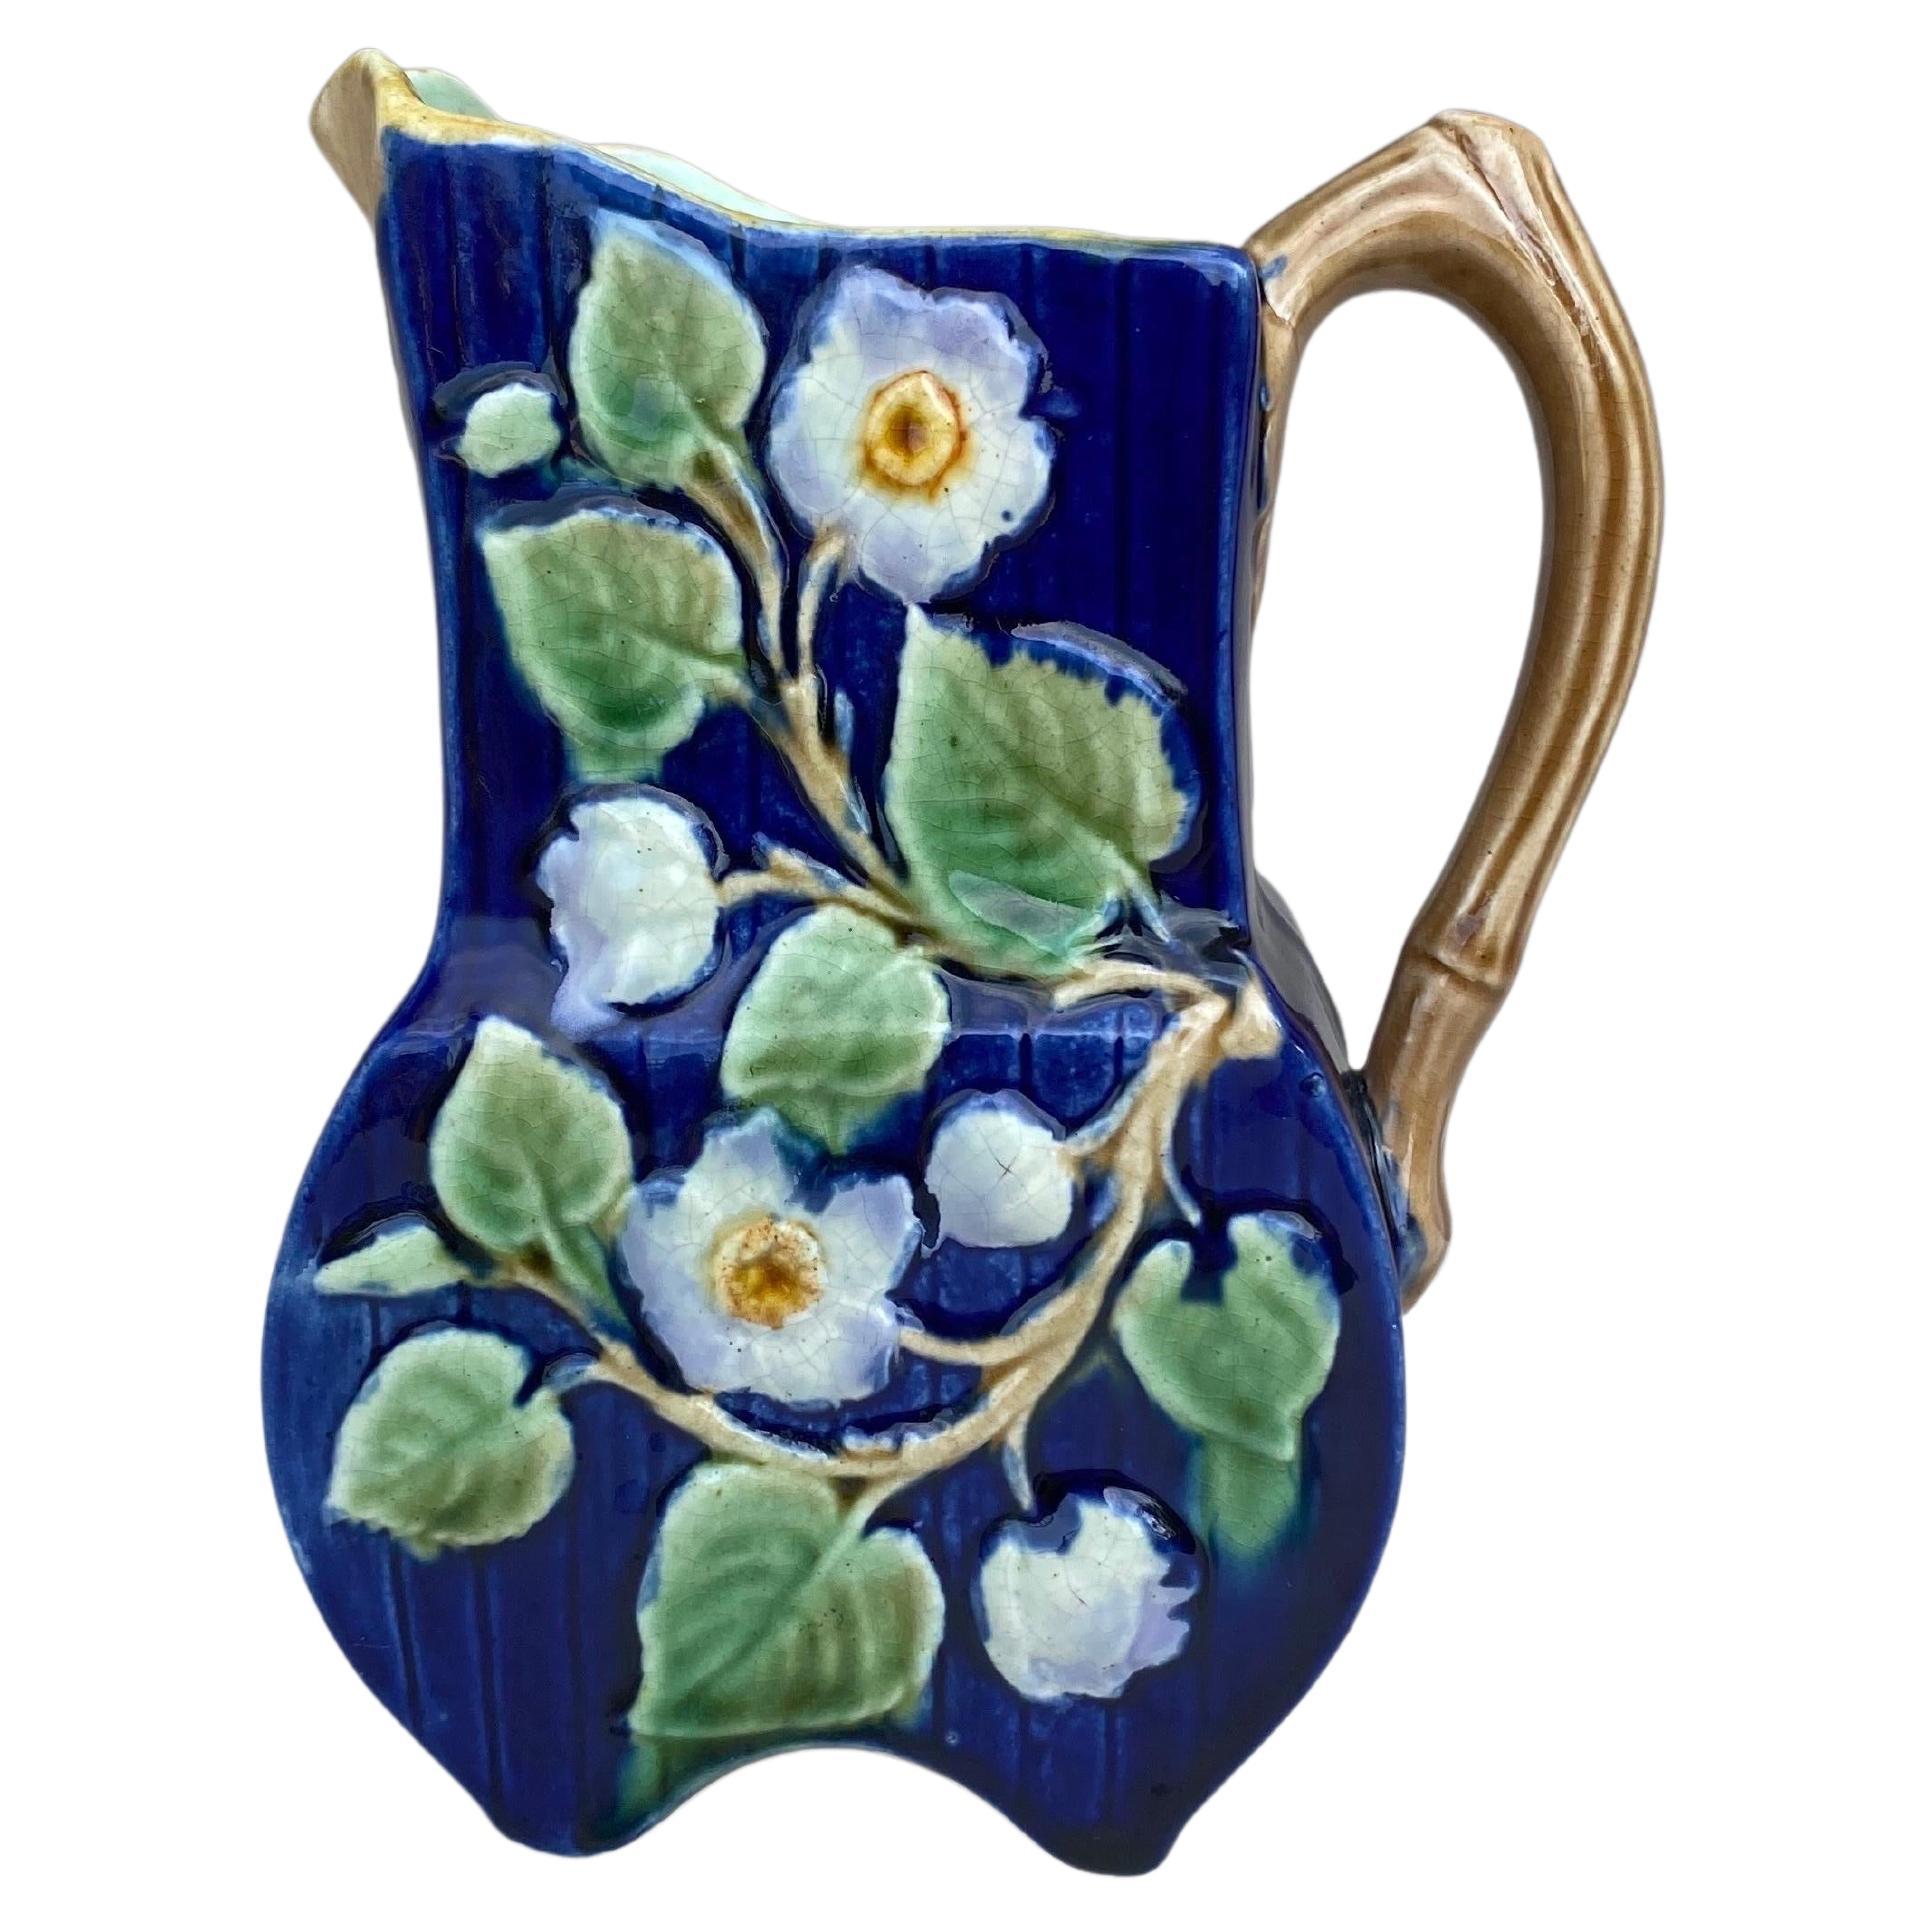 19th Century Majolica English Majolica White on a cobalt background flowers pitcher.